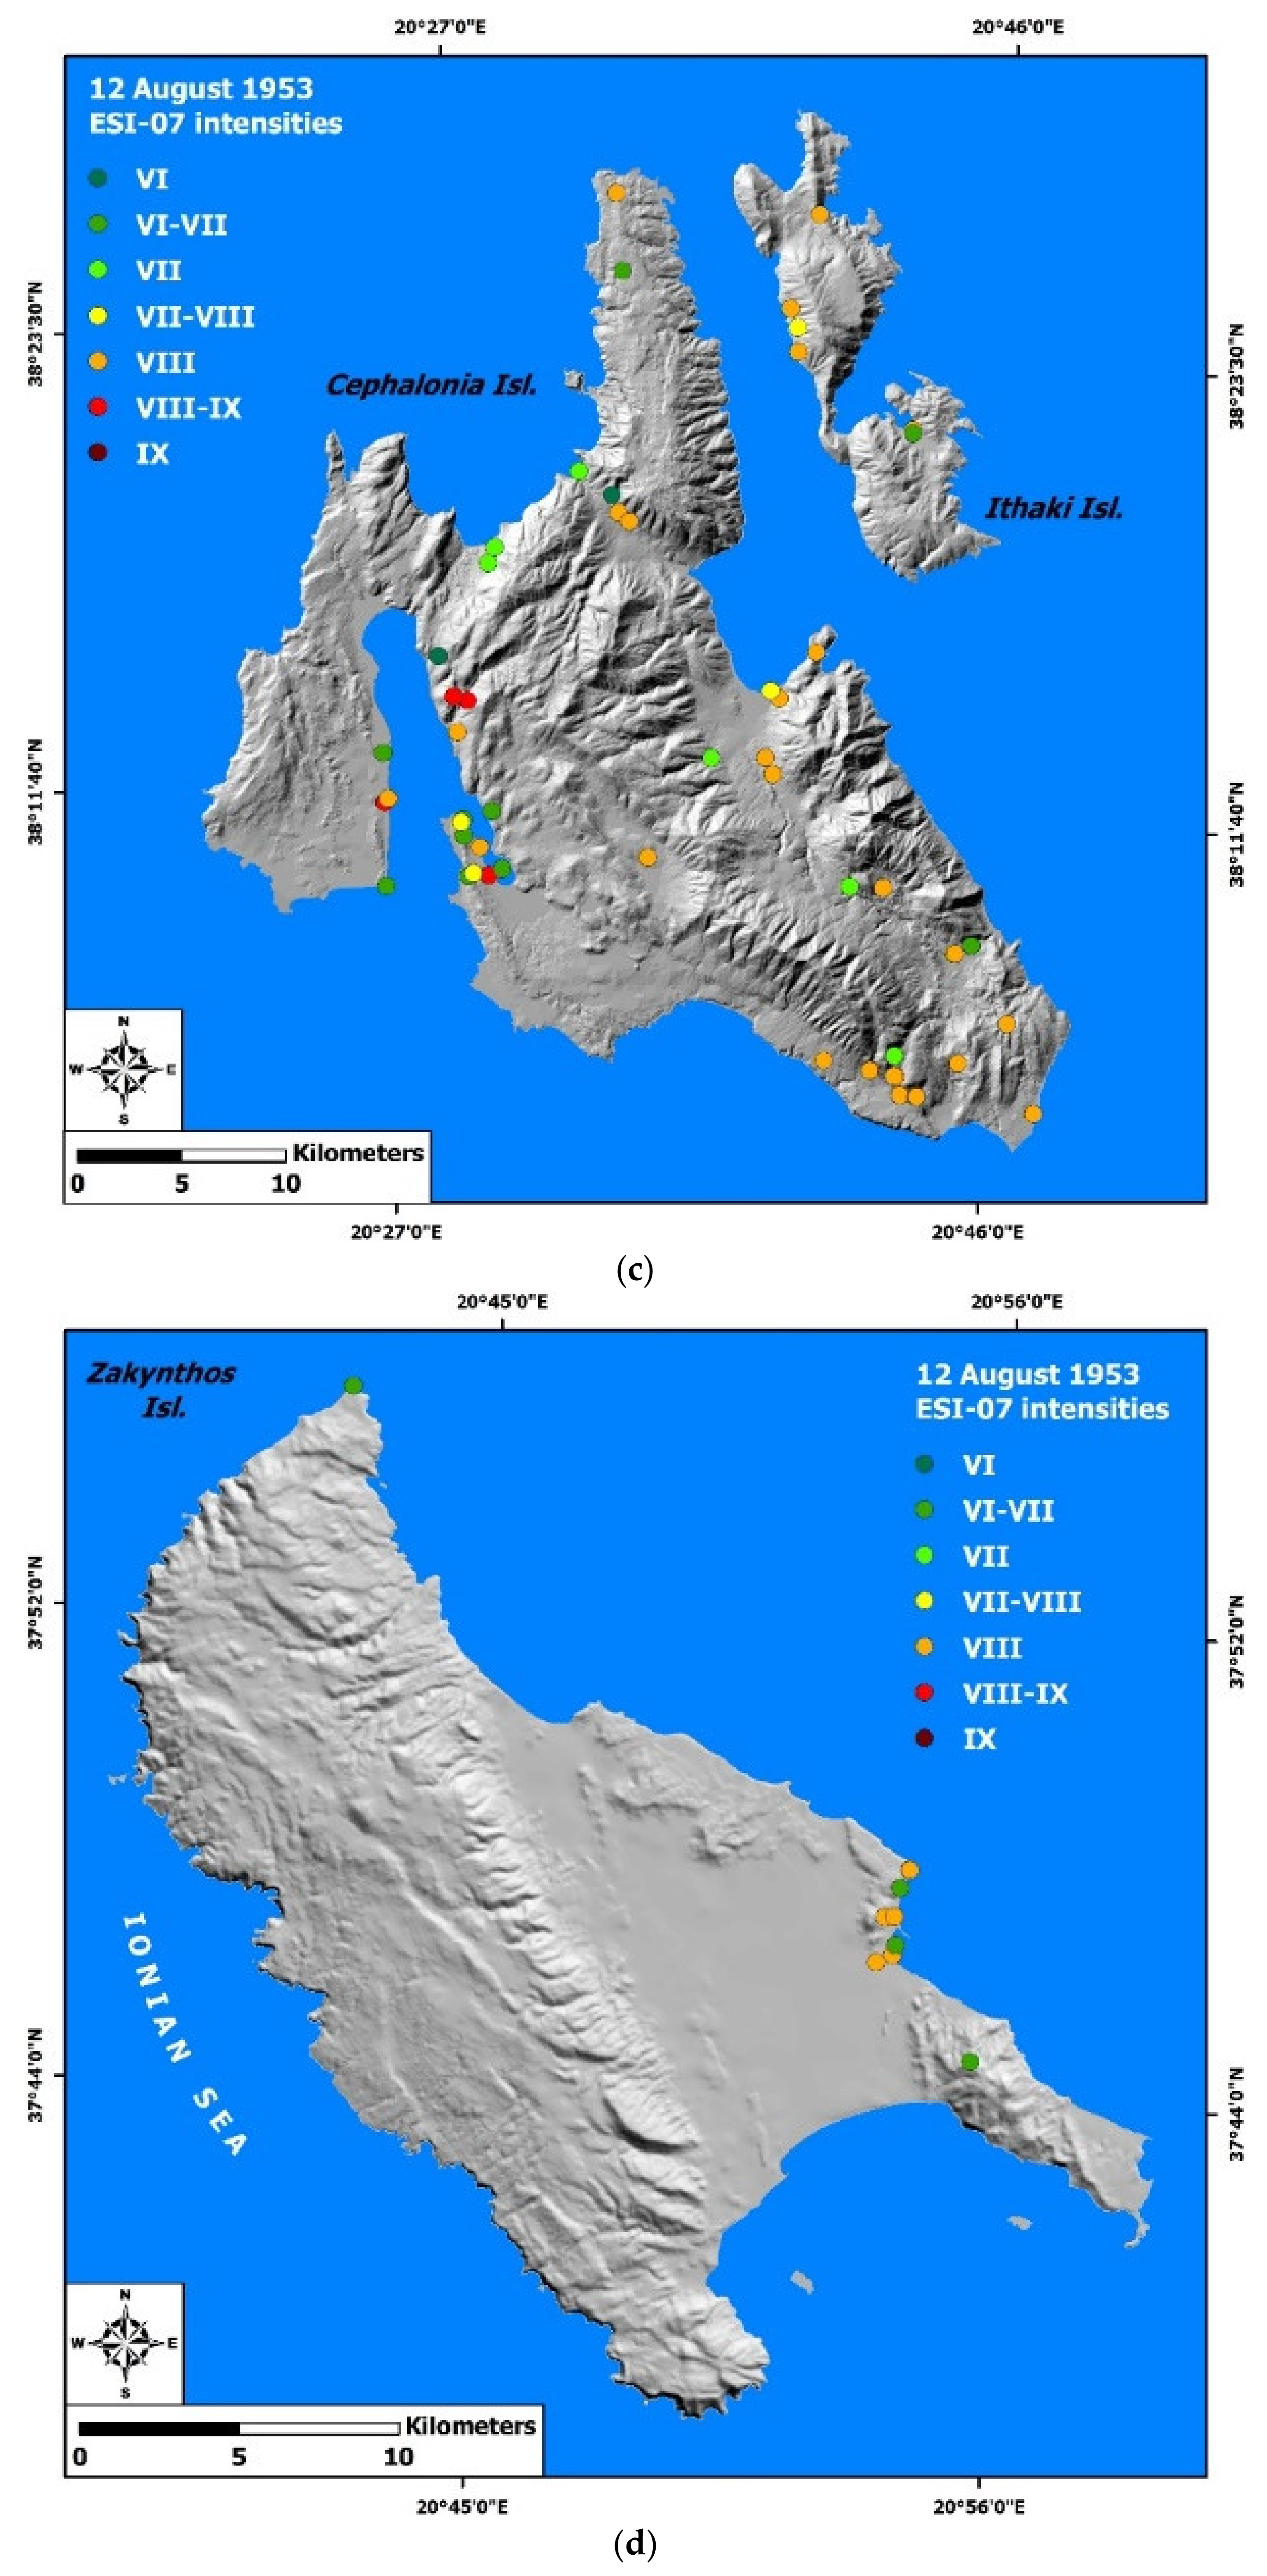 Applied Sciences | Free Full-Text | Revisiting the Most Destructive  Earthquake Sequence in the Recent History of Greece: Environmental Effects  Induced by the 9, 11 and 12 August 1953 Ionian Sea Earthquakes | HTML